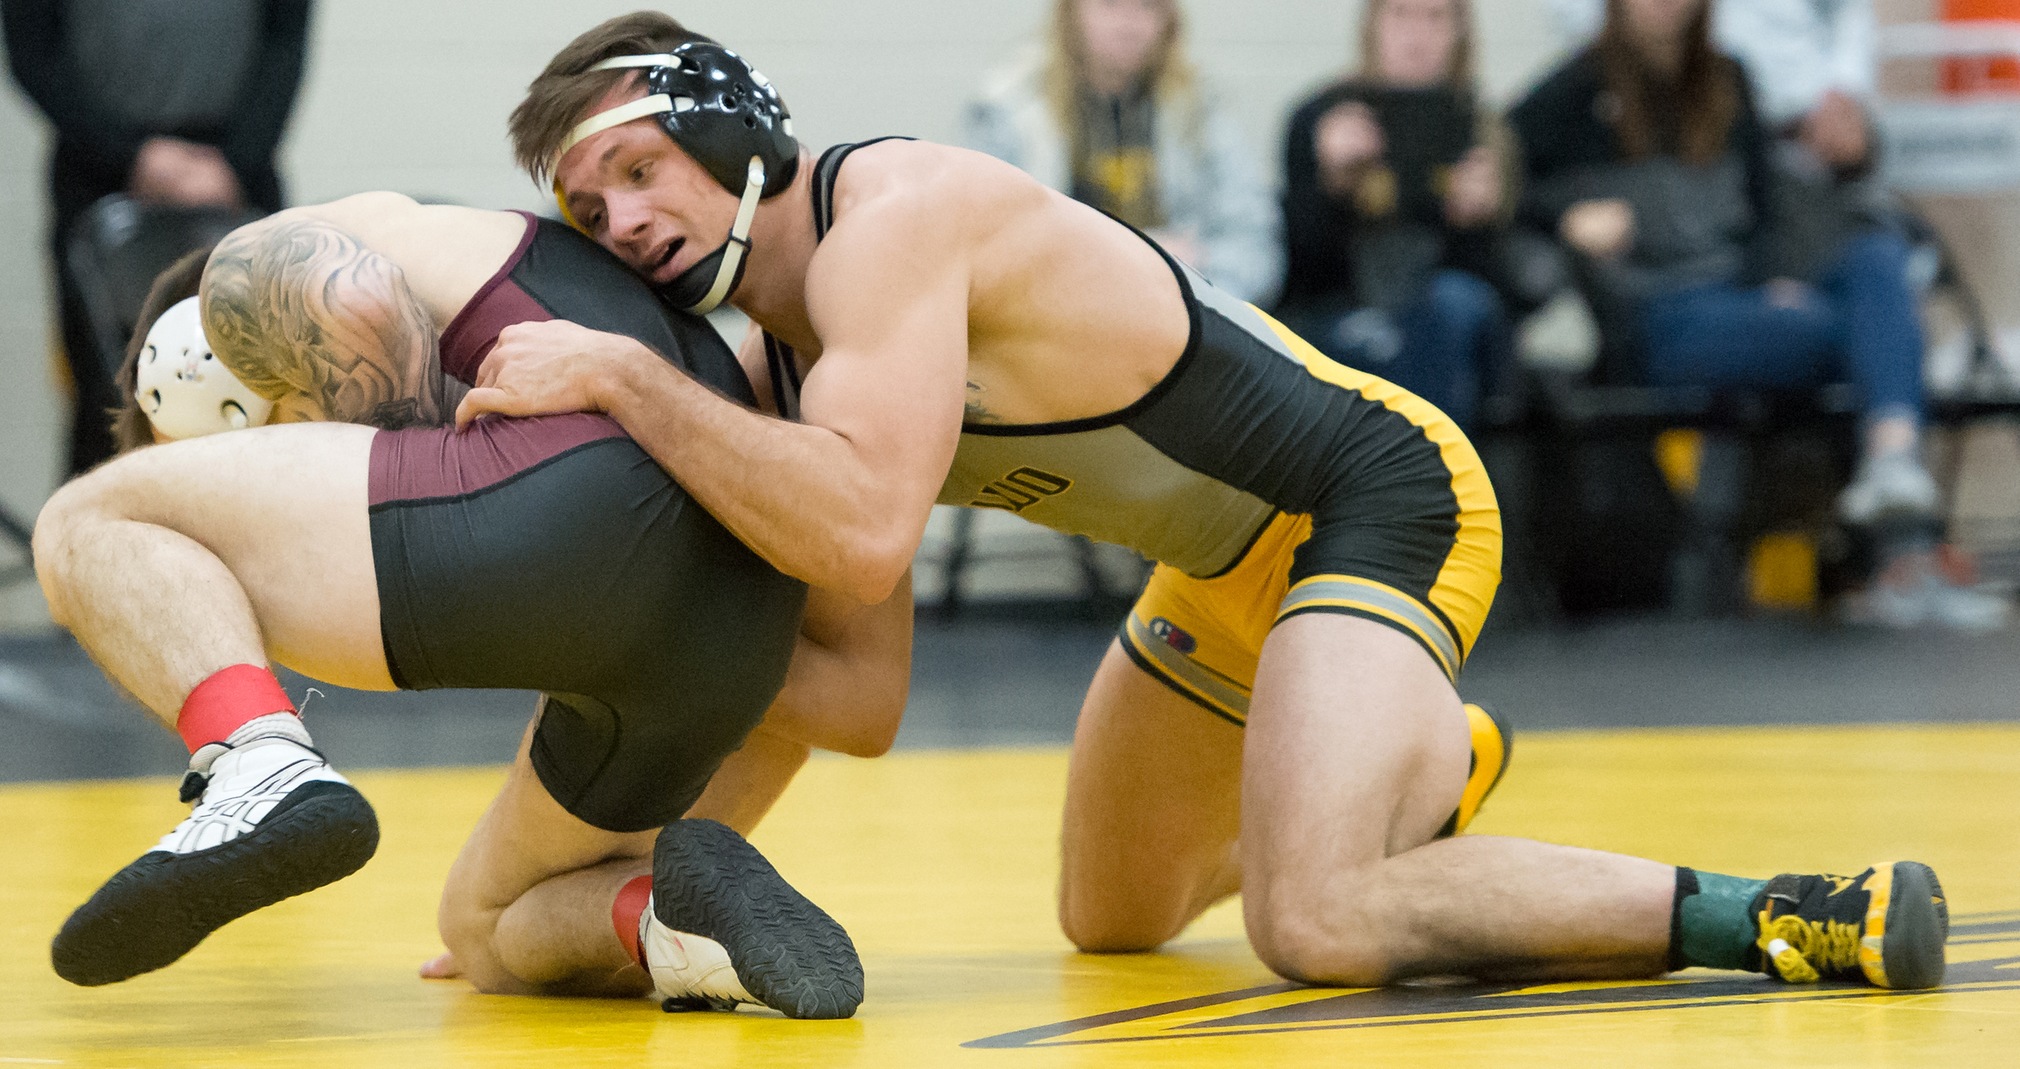 Mark Choinski, ranked second in the country, remained unbeaten on the season with his 11-3 victory.